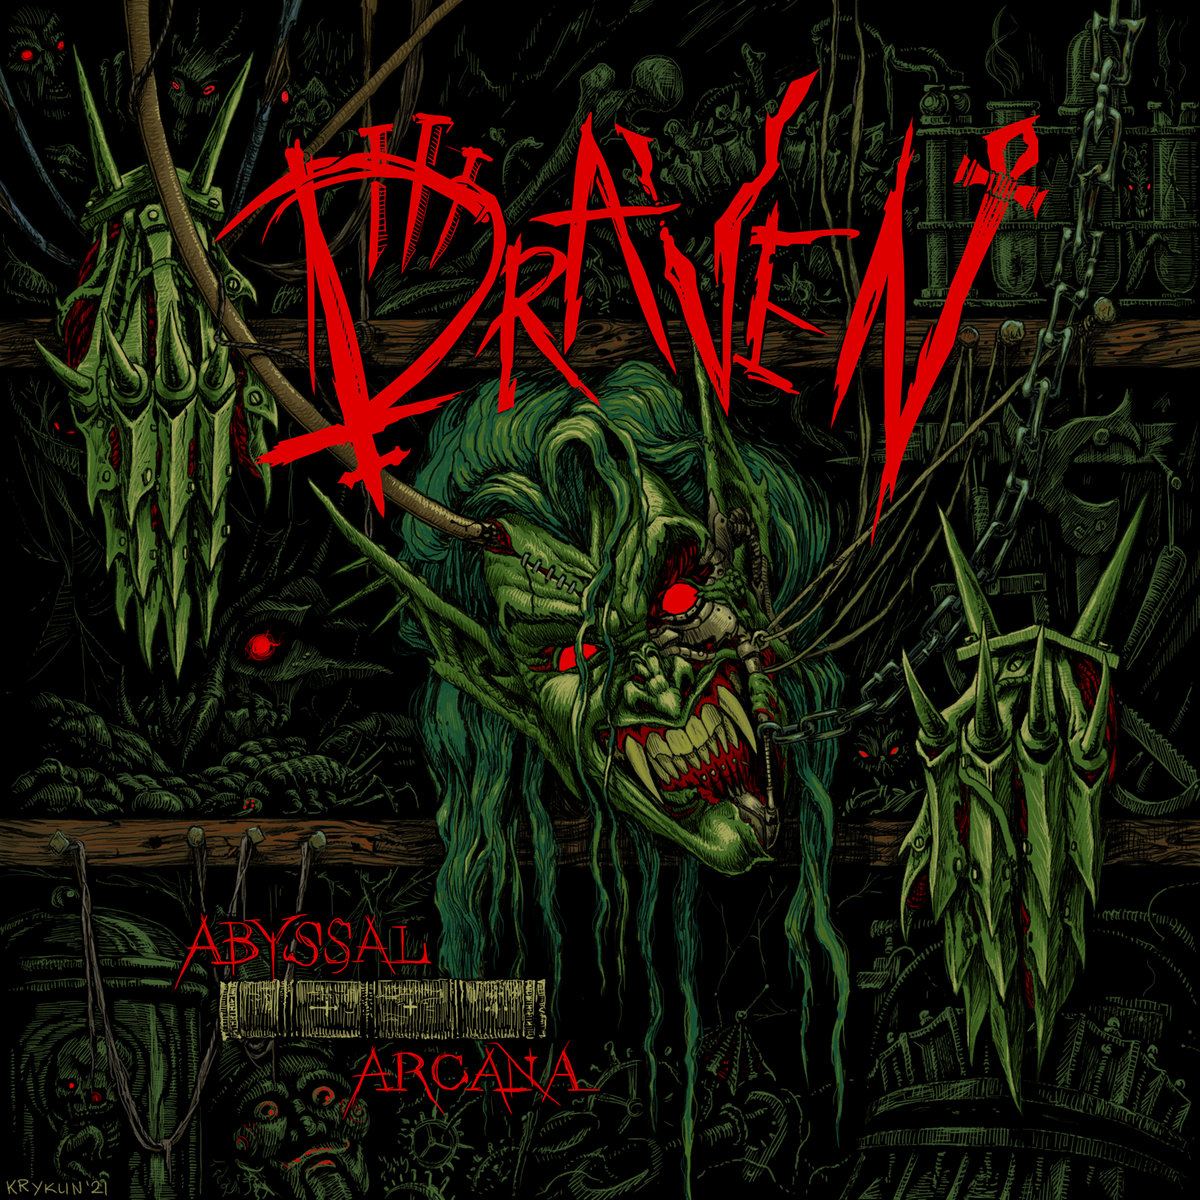 a1253848531 10 - Draven is out for blood on debut ‘Abyssal Arcana’